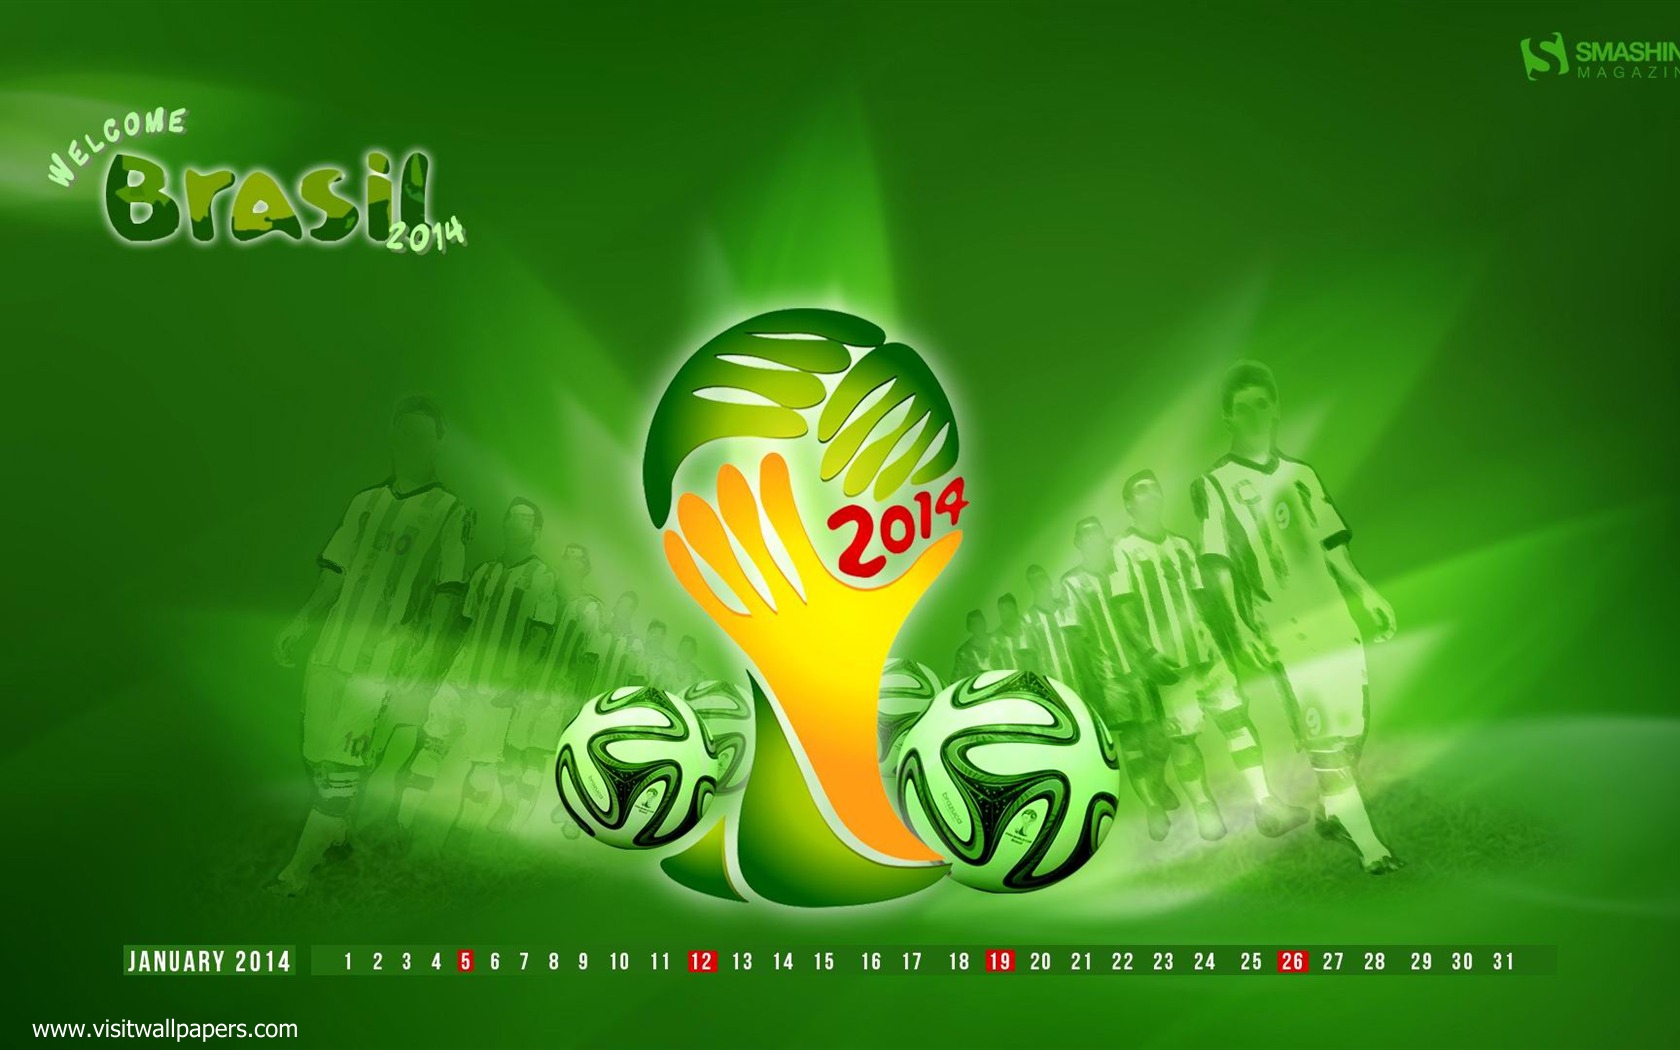 worldcup_2014_03